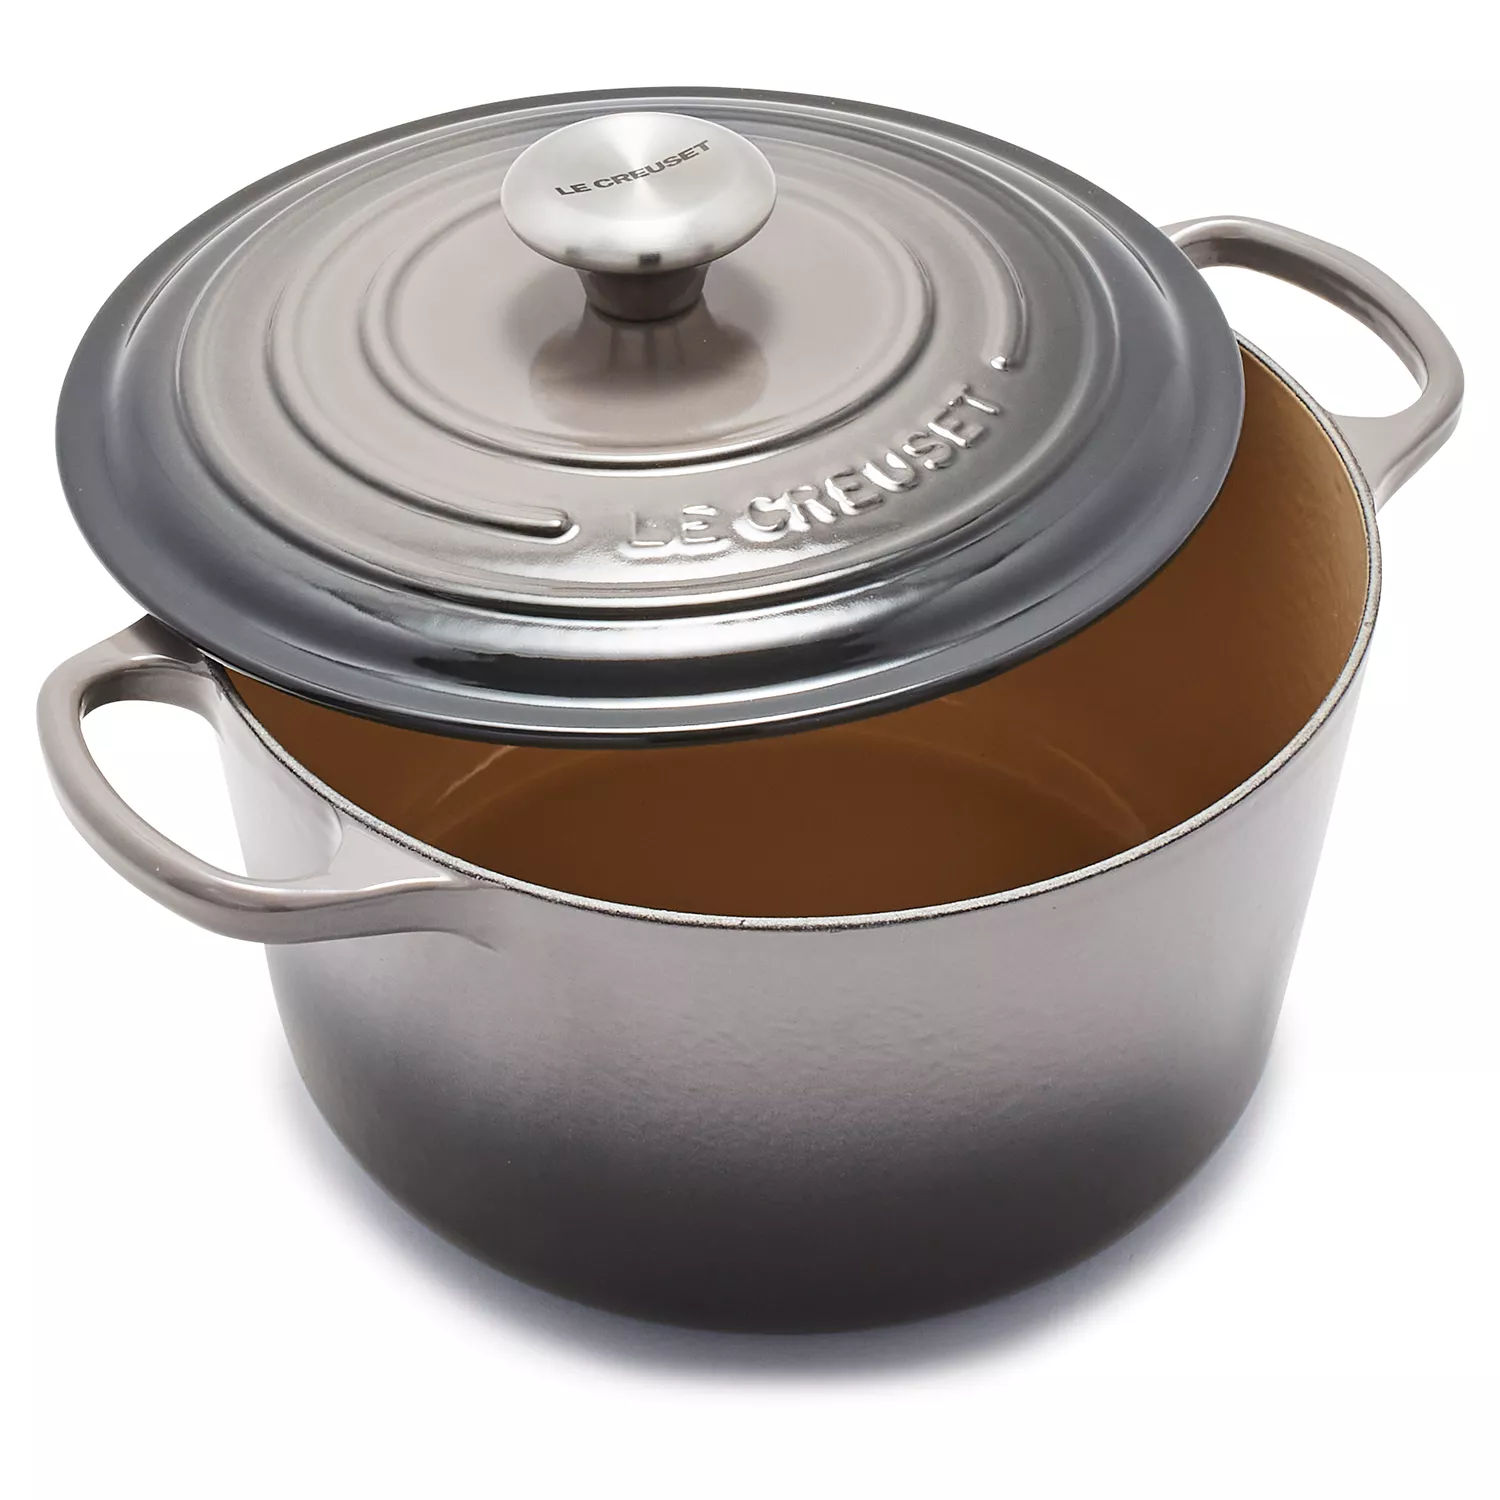 EDGING CASTING Enameled Cast Iron Covered Dutch Oven with Dual Handle,  Dutch Ovens with Lid for Bread Baking, Safe to 500 degrees, 3.5 Quart